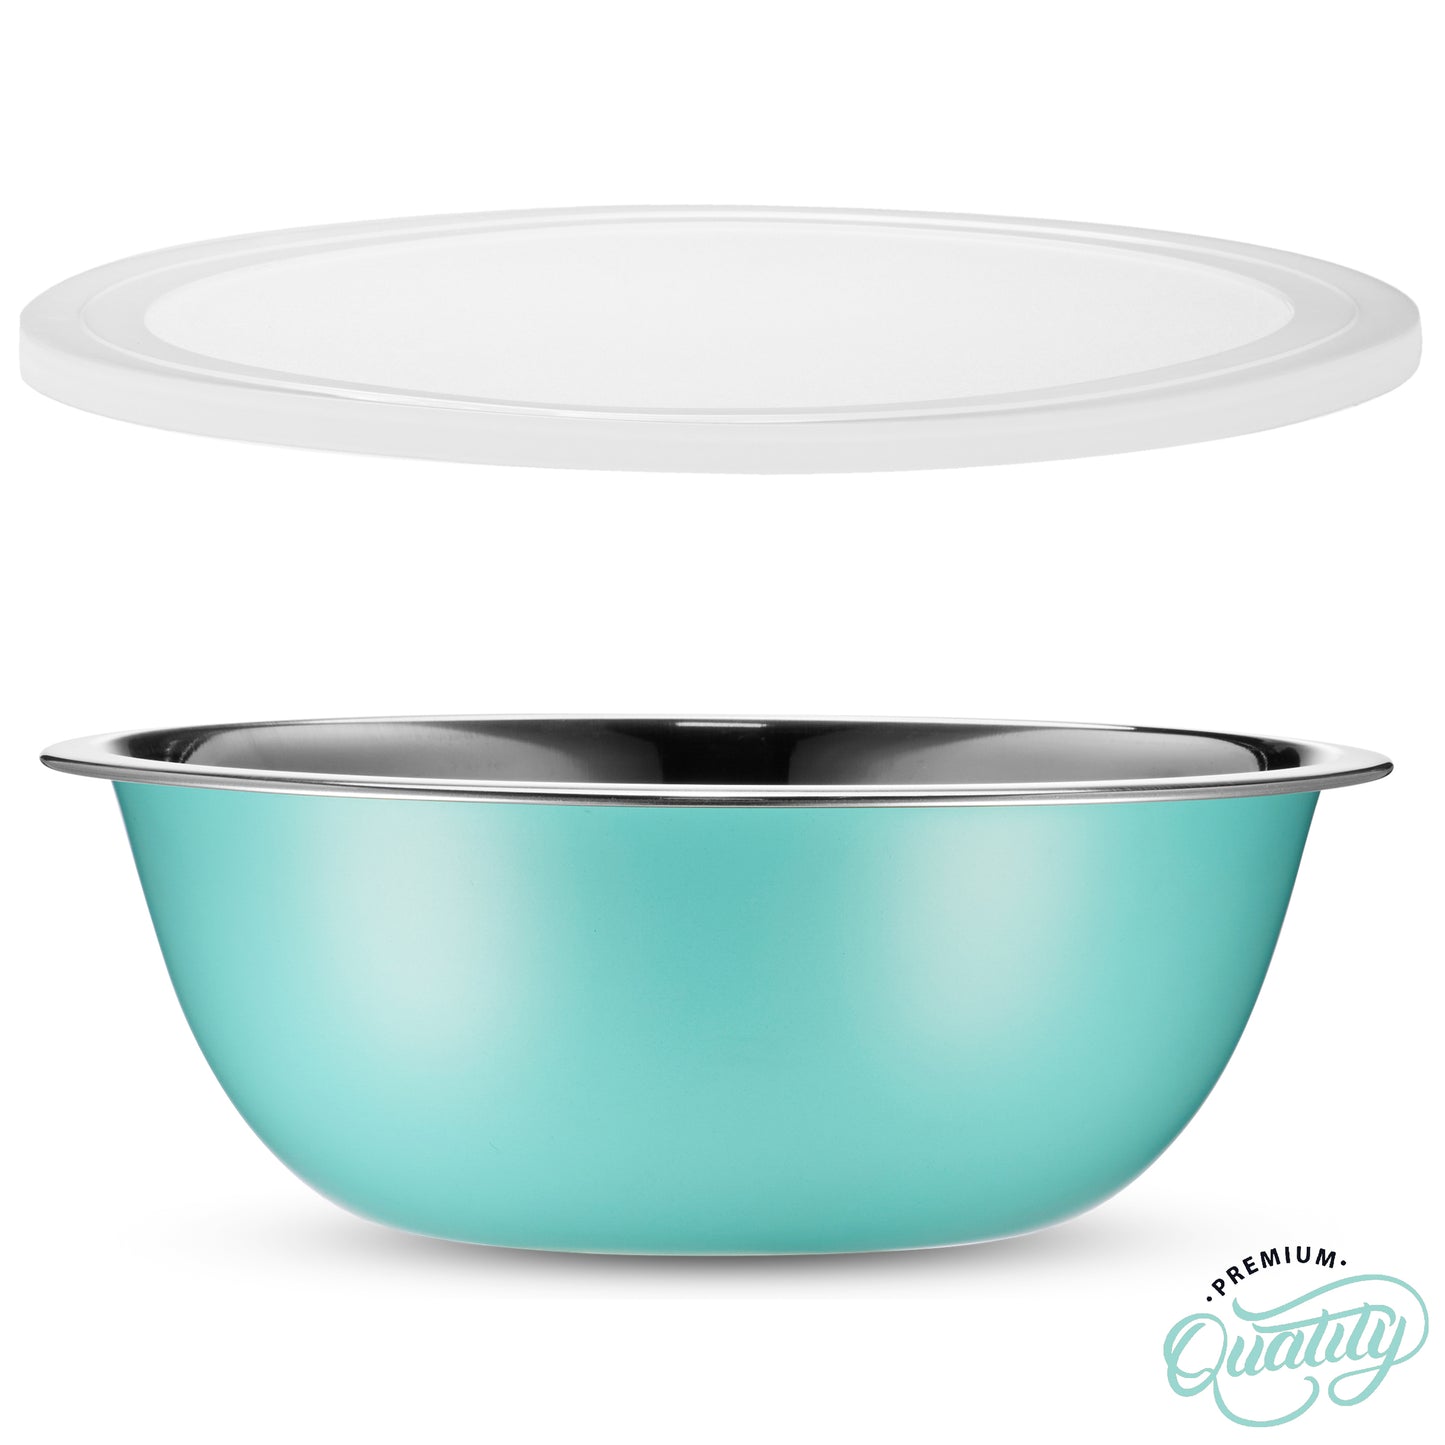 Stainless Steel Mixing Bowls With Lids Set, Blue